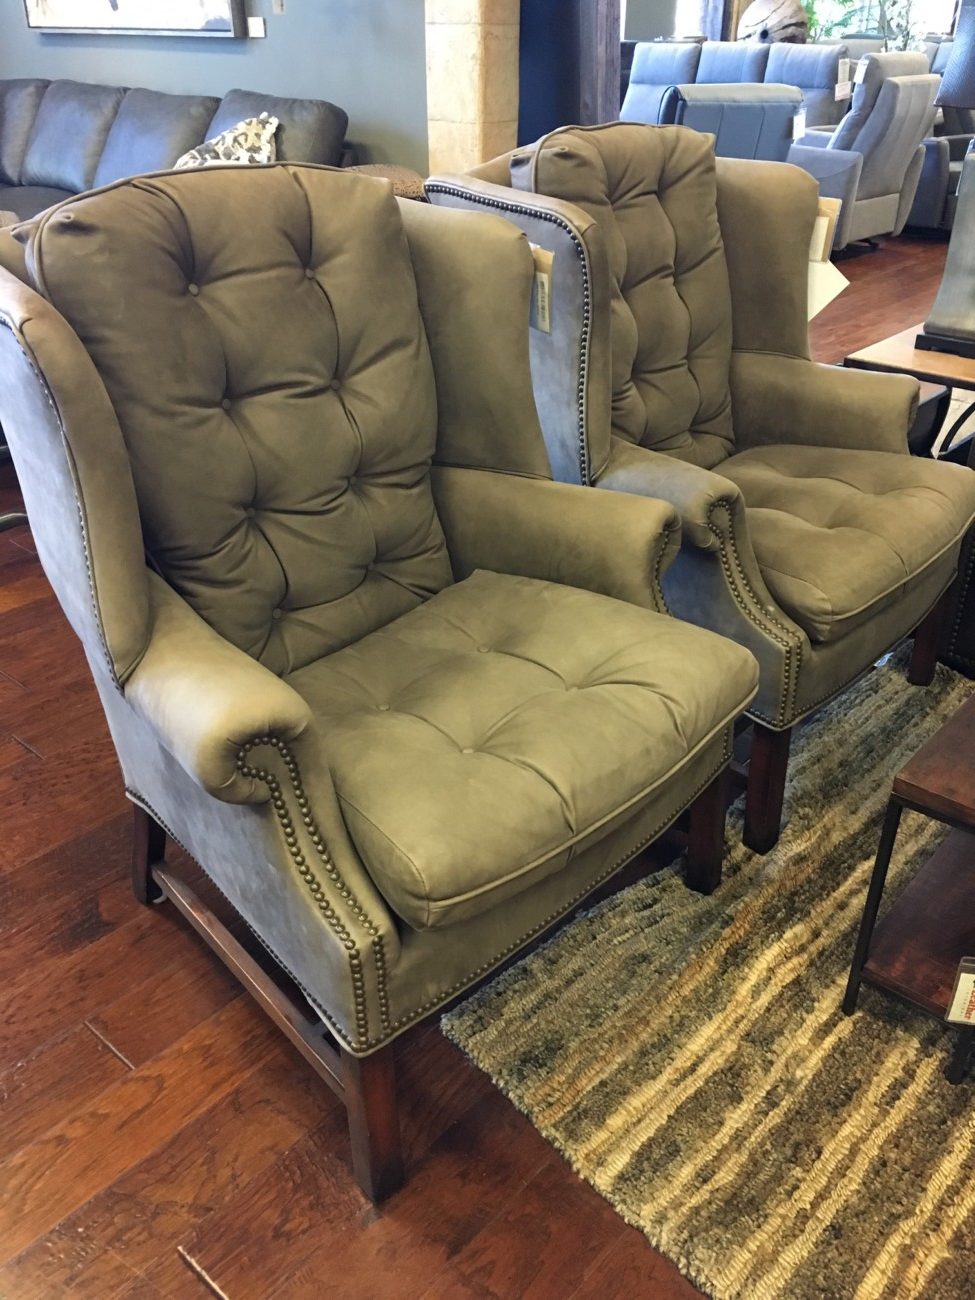  Hickory Chair Dallas Tx for Large Space